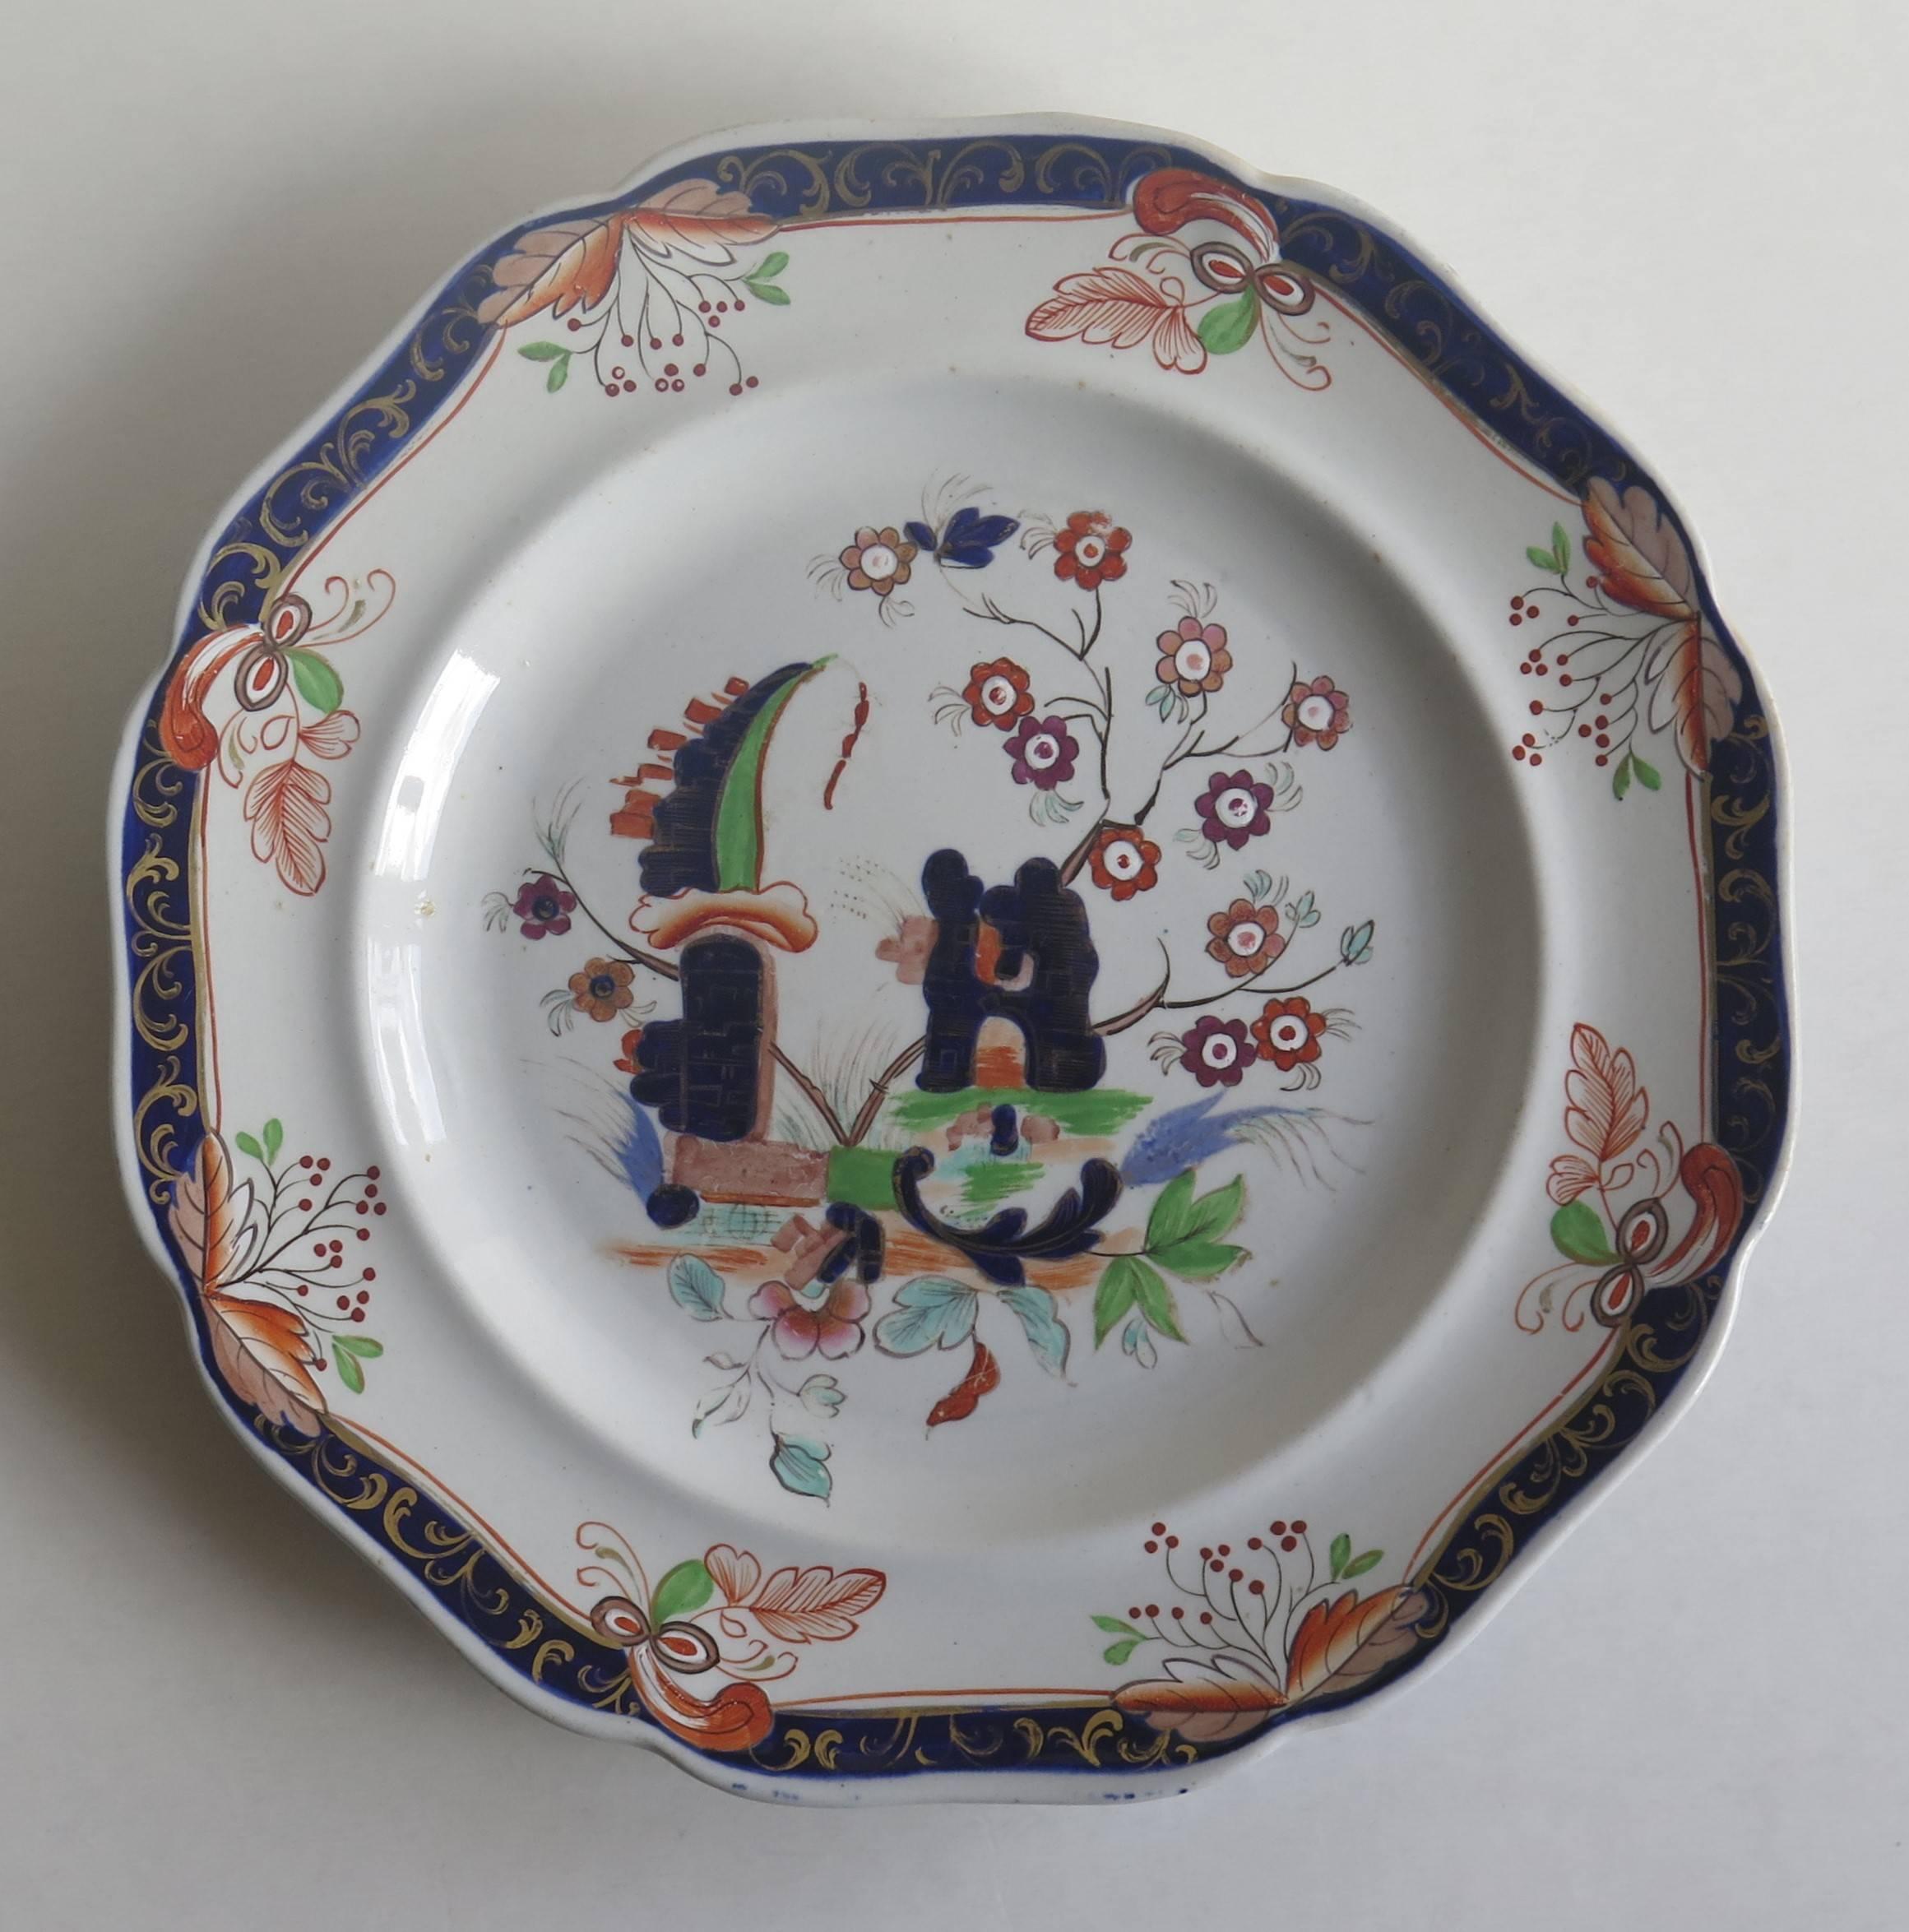 This is a highly decorative English Plate made of Imperial Stone China (ironstone), and manufactured by John Ridgway, dating to the William IV period of the 19th century, circa 1835. 

This plate has been carefully hand painted in bold colorful